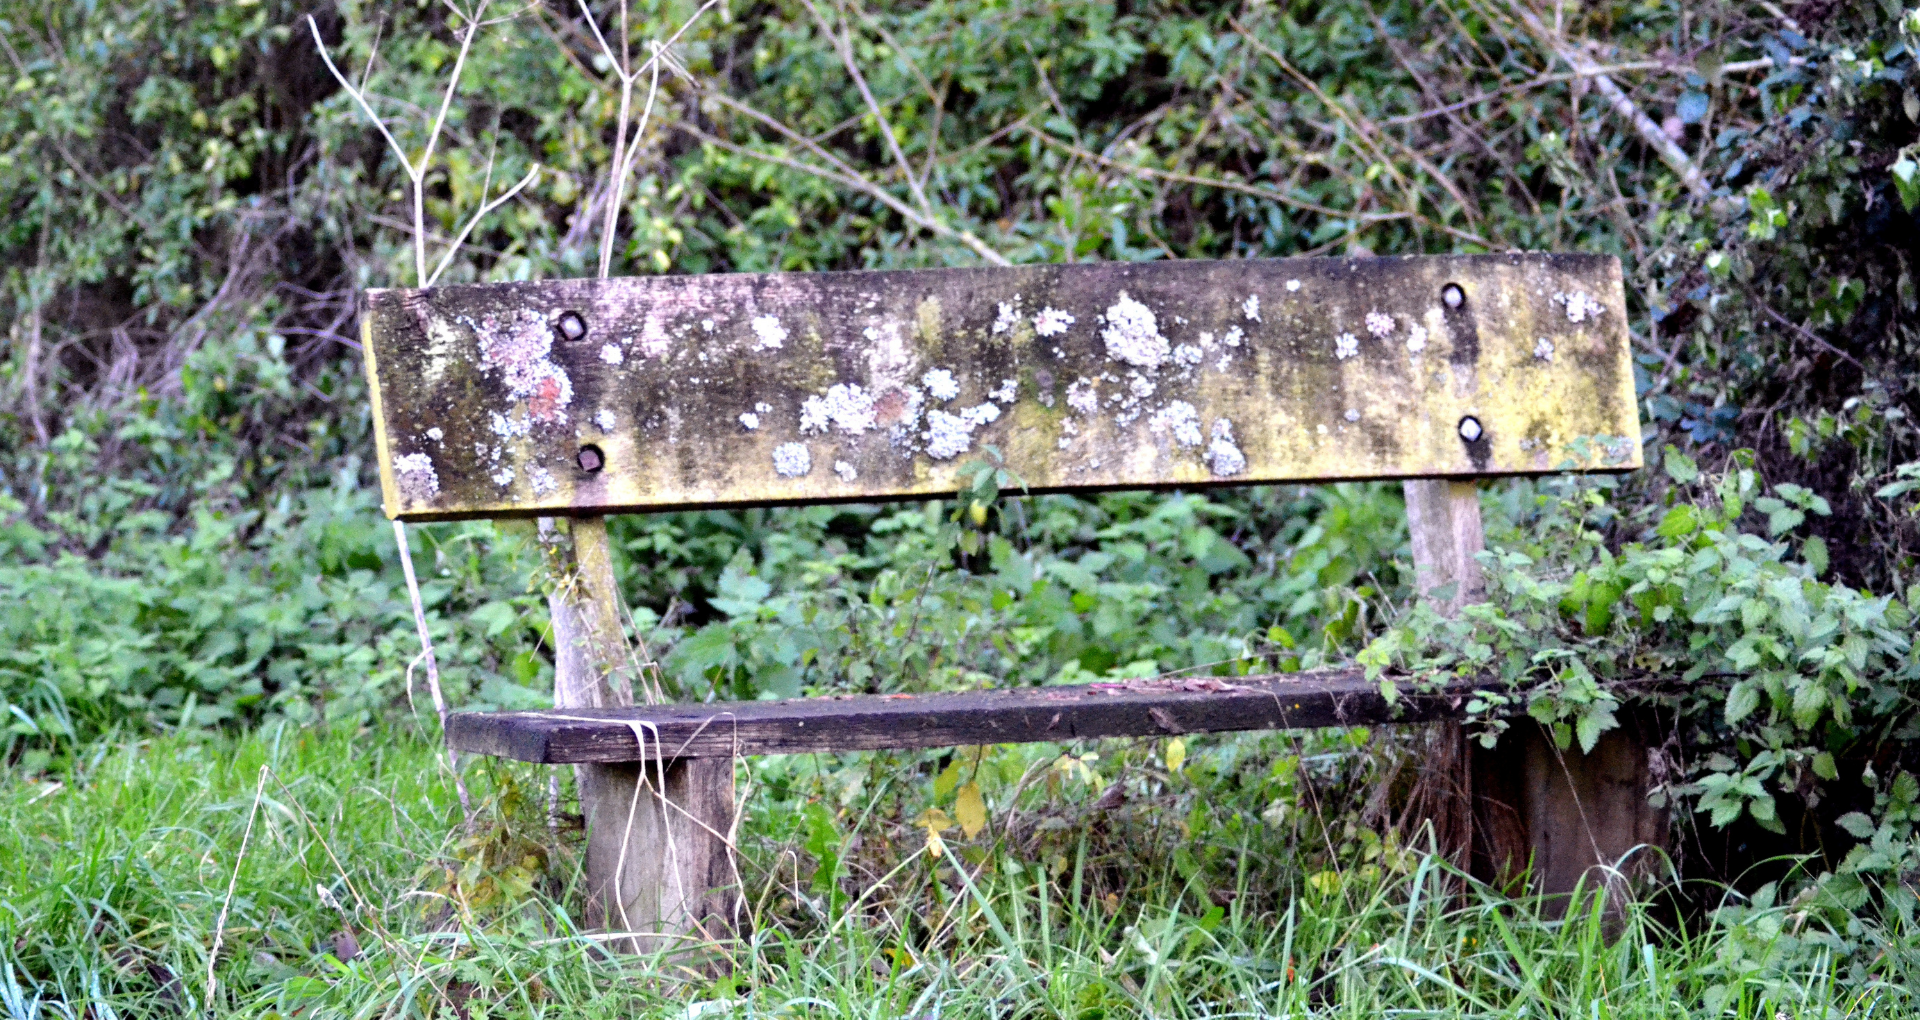 A moss-covered bench sits in grass and vegetation in the background.